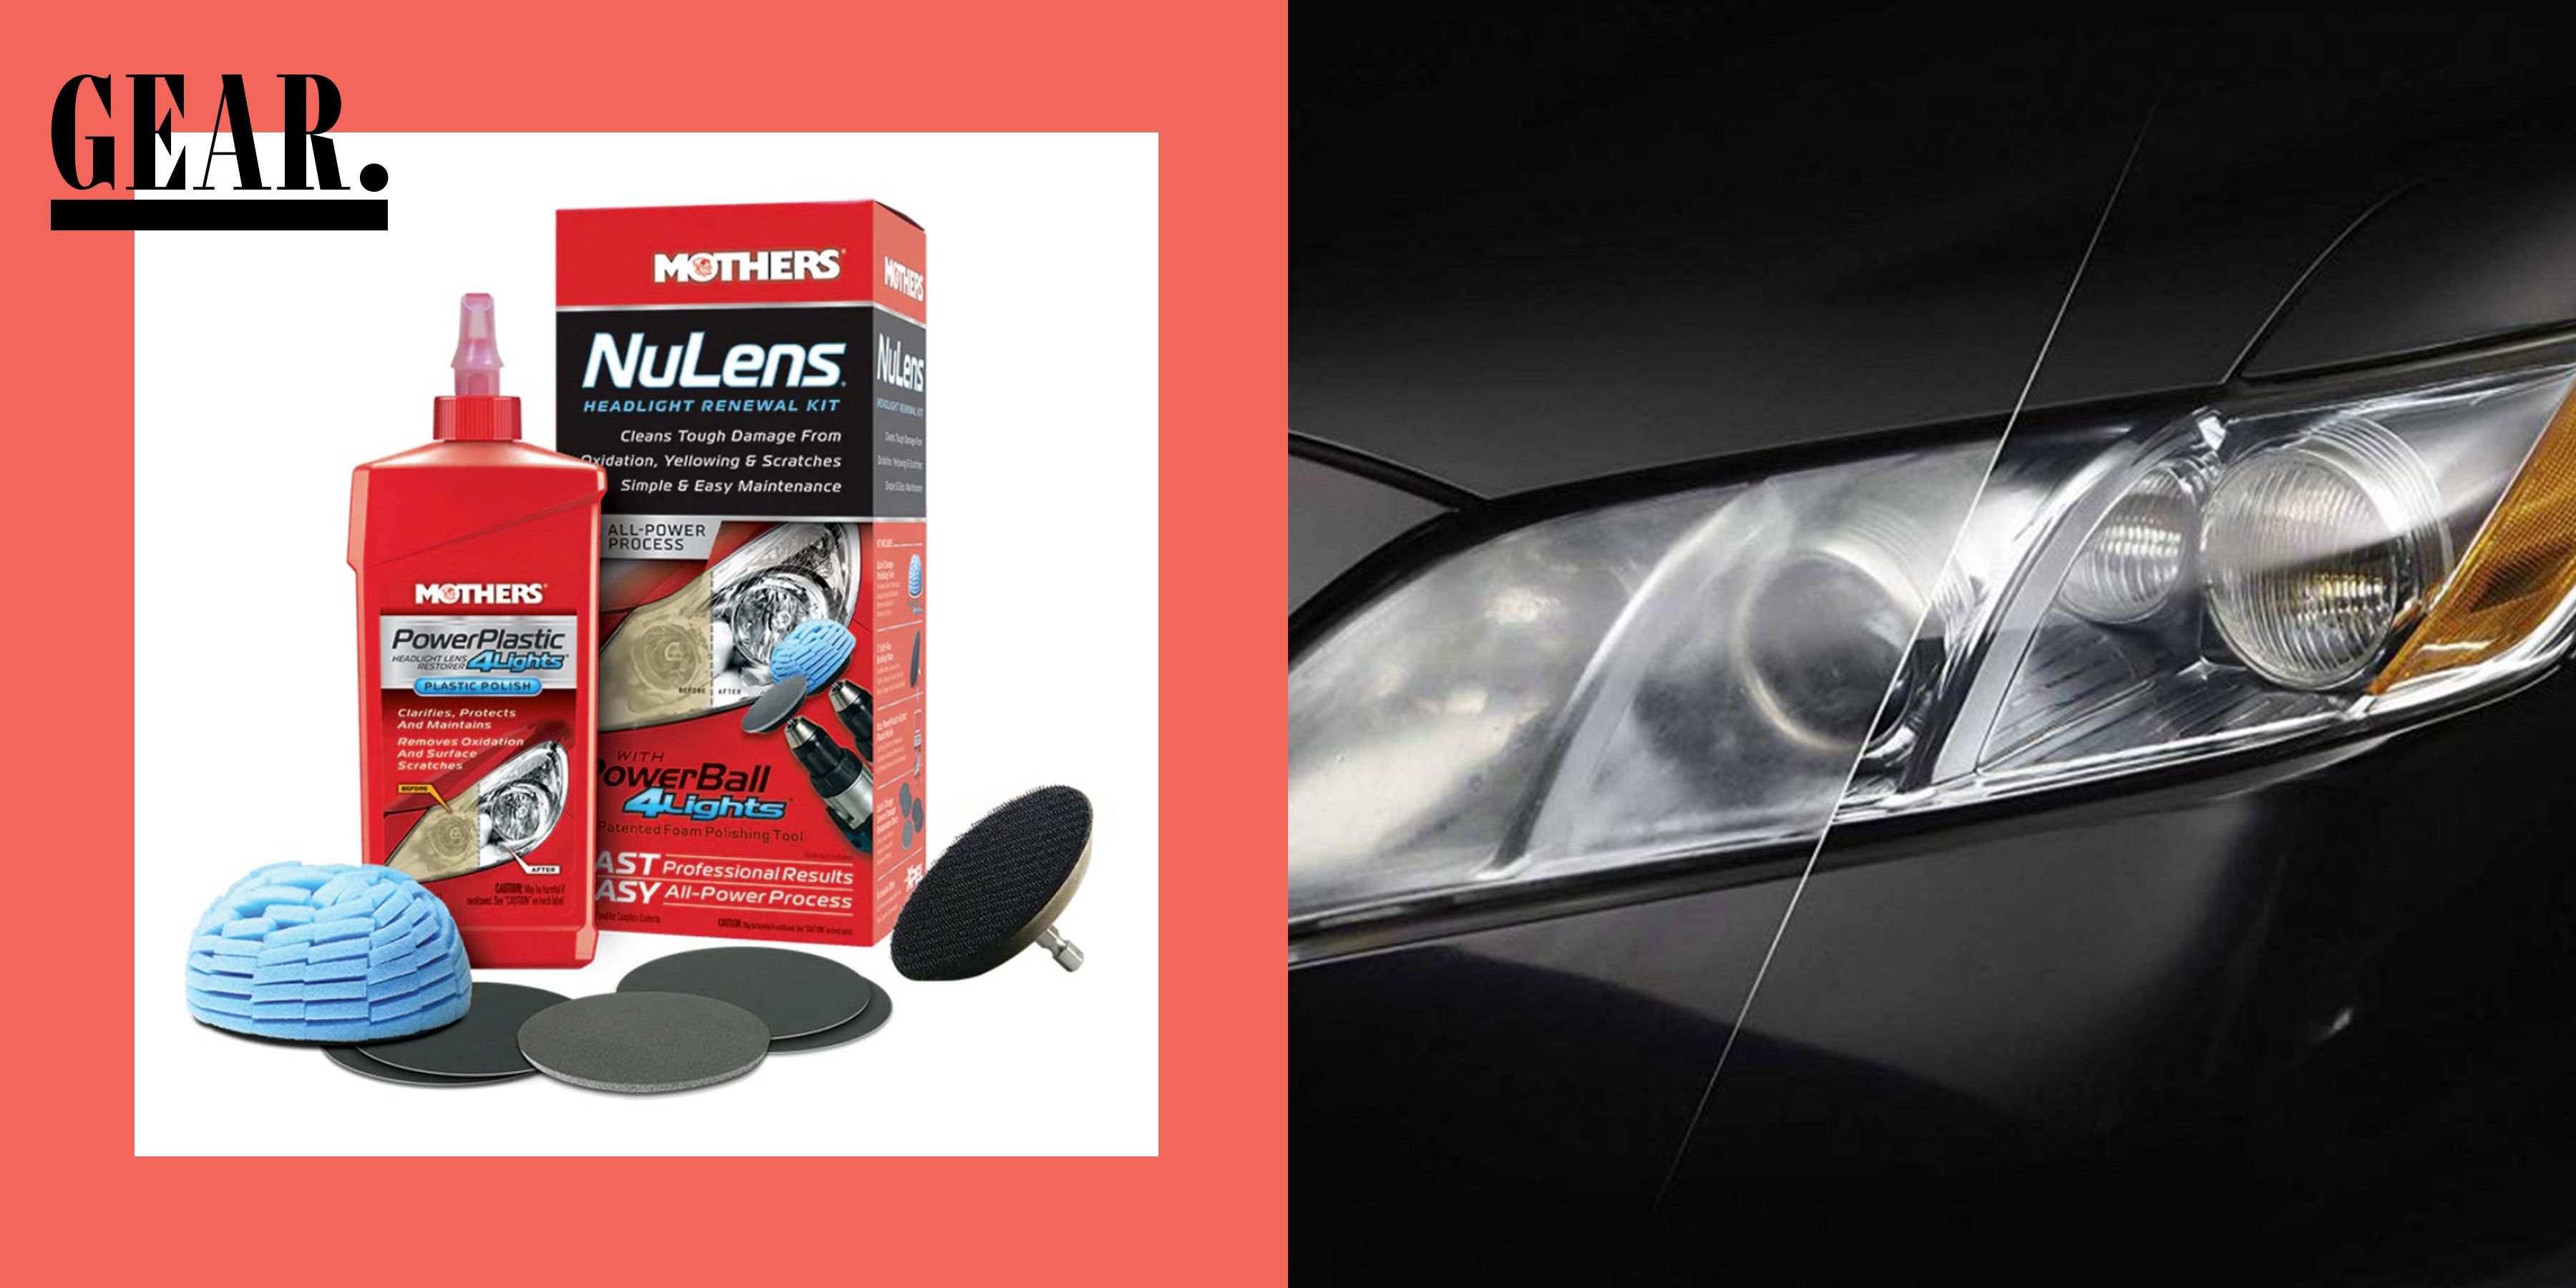 Dull No More! Improve Your Vision with These Top-rated Headlight Restoration Kits